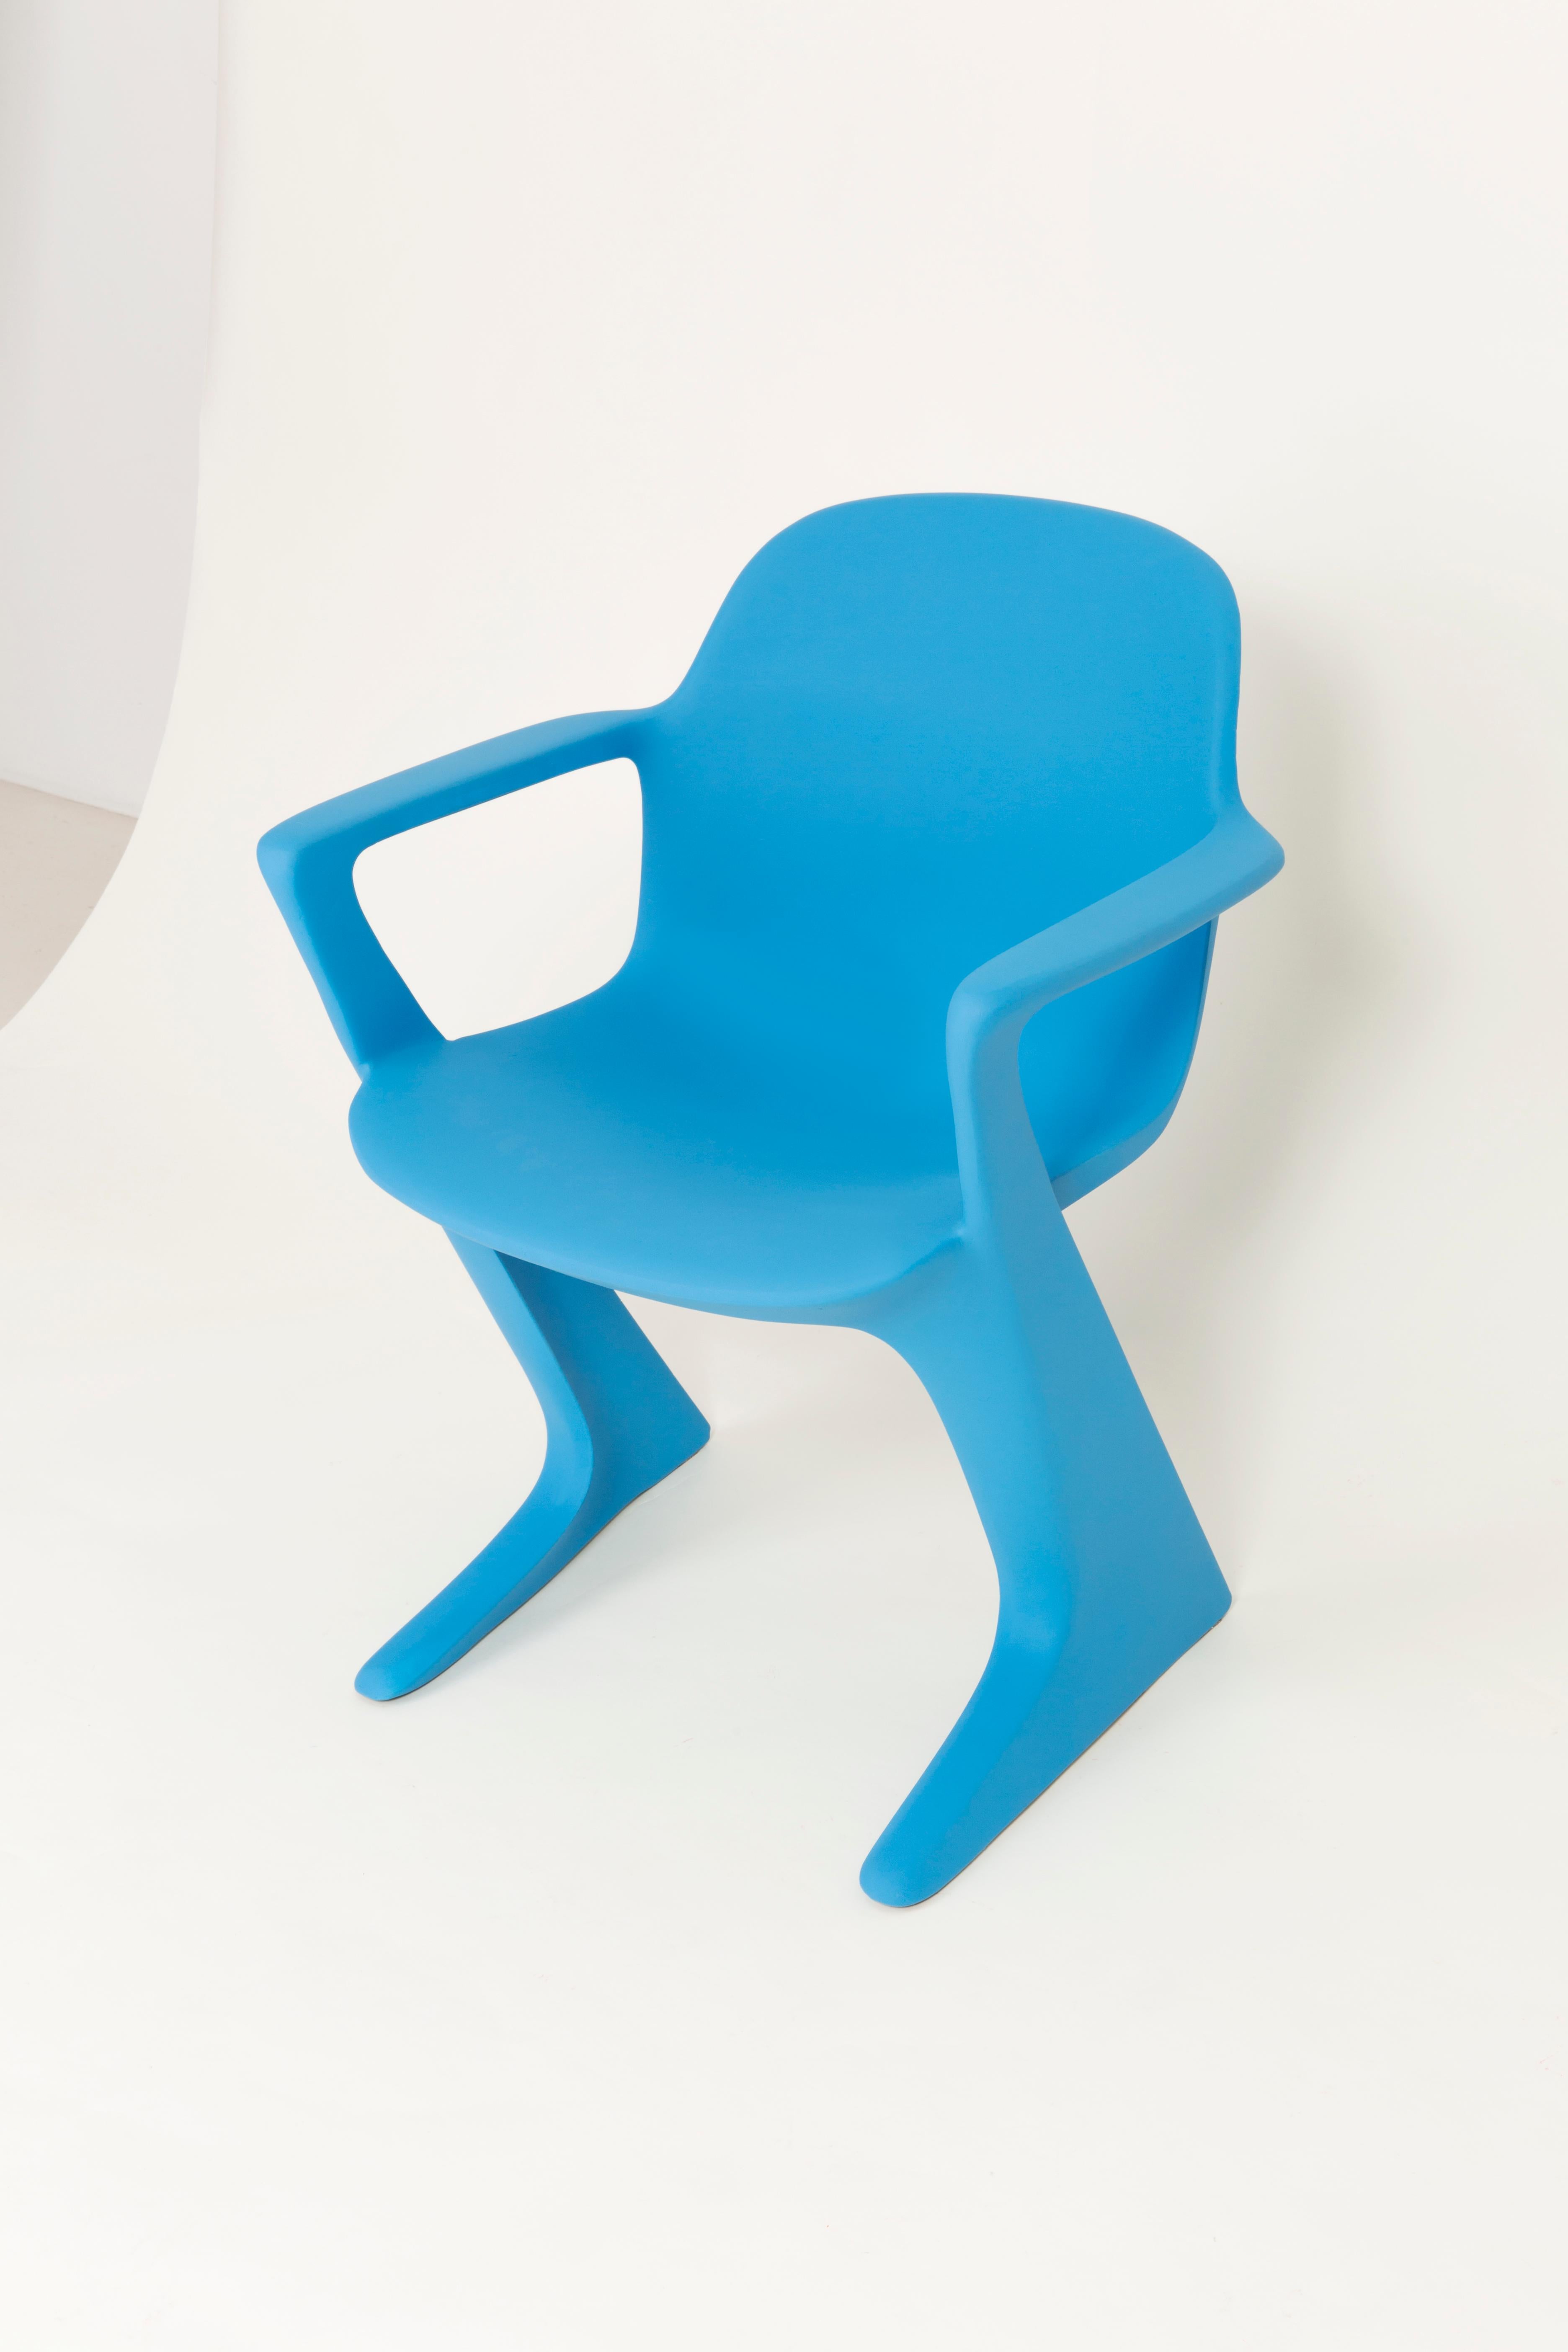 Fiberglass Set of Two Blue Kangaroo Chairs Designed by Ernst Moeckl, Germany, 1968 For Sale